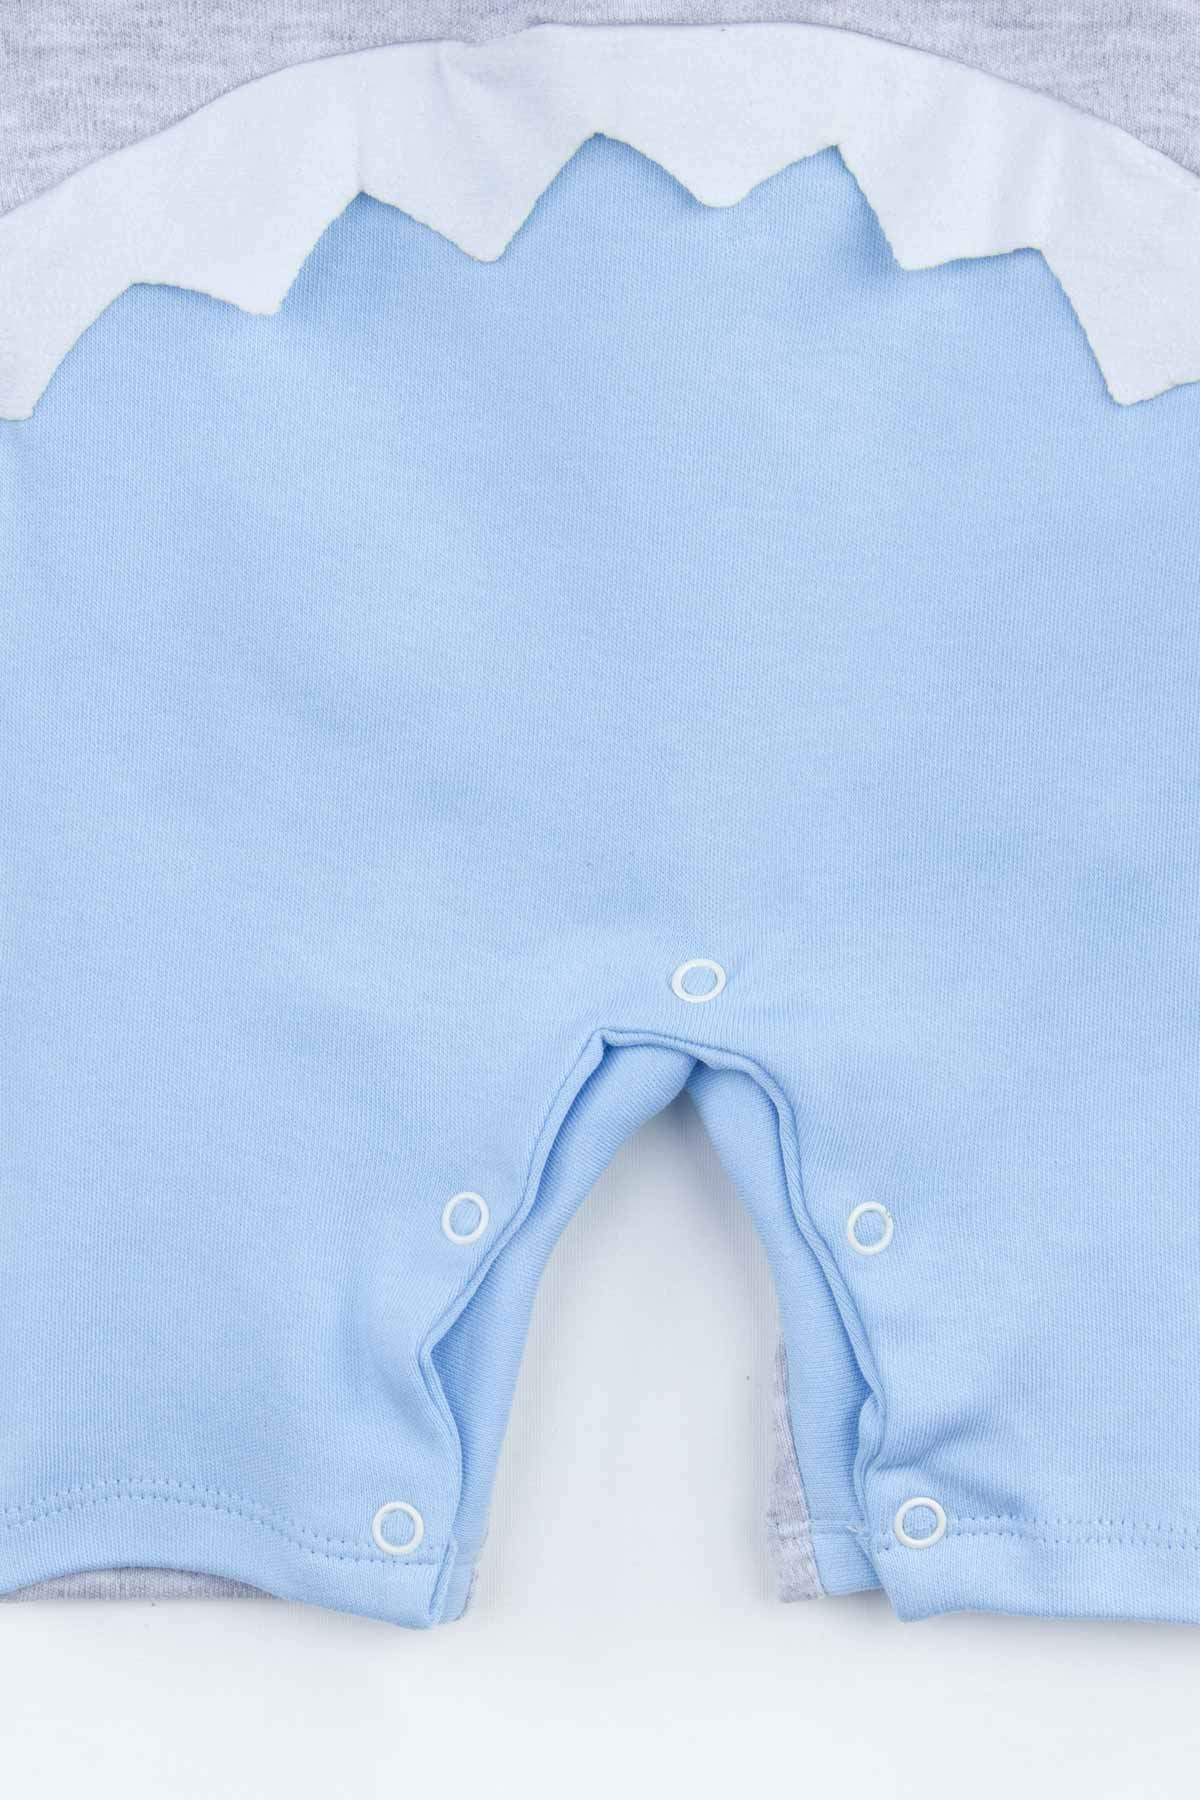 Blue Summer Shark Baby Boy Rompers Fashion 2021 New Season Style Babies Clothes Outfit Cotton Comfortable Underwear for Boys Baby